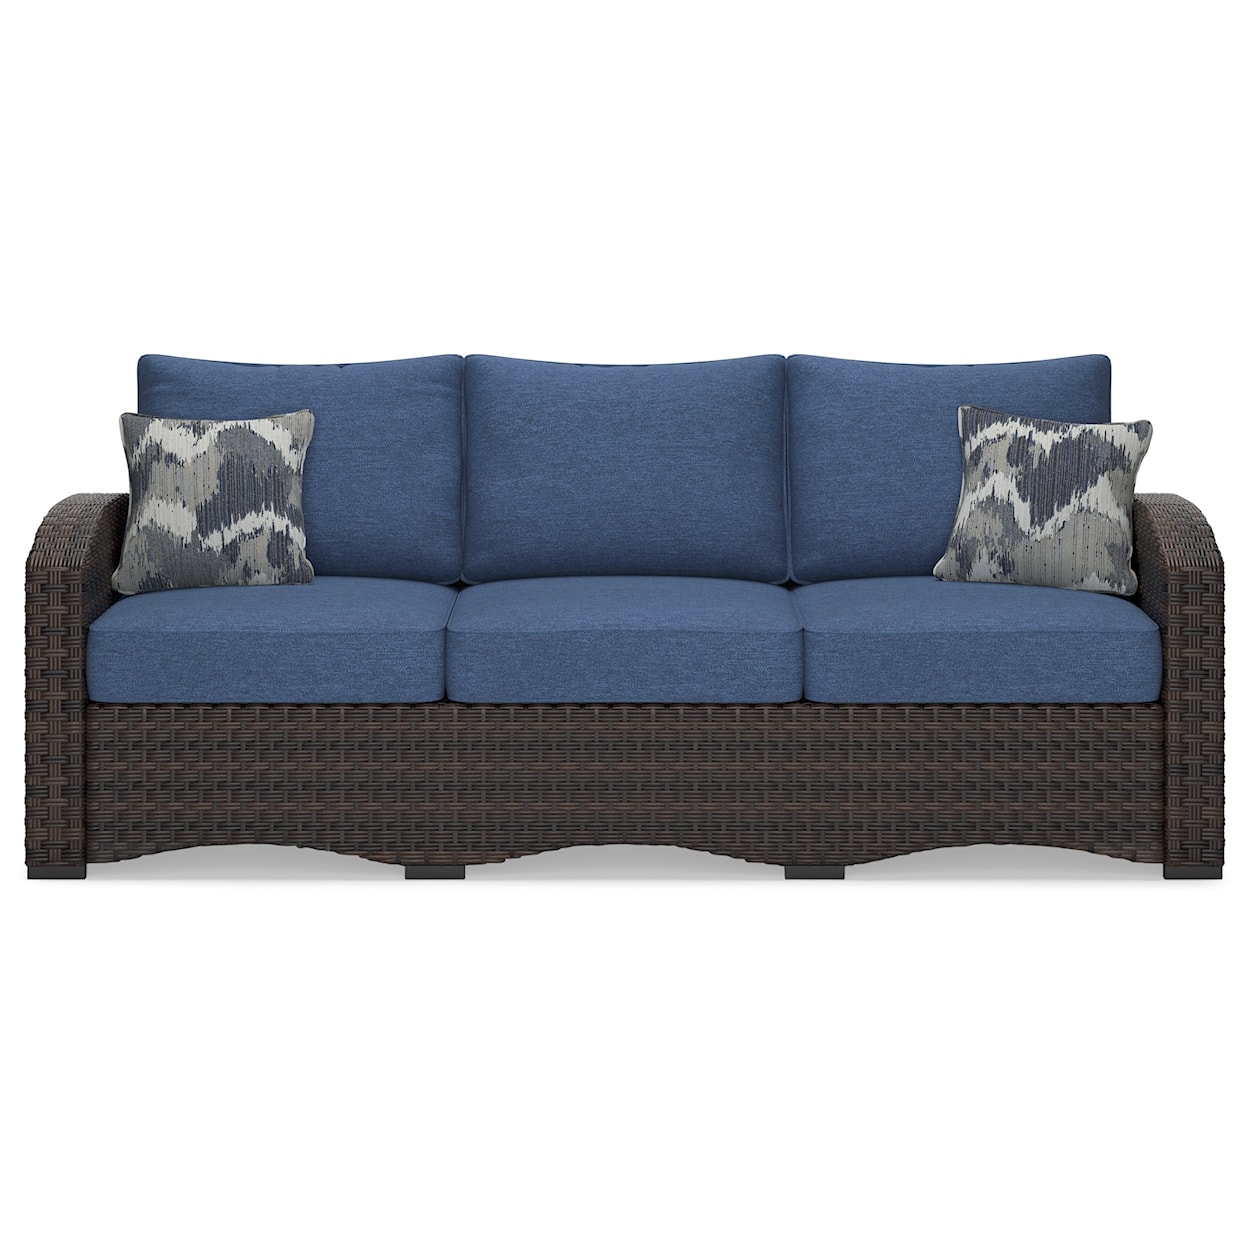 Benchcraft Windglow Outdoor Sofa With Cushion